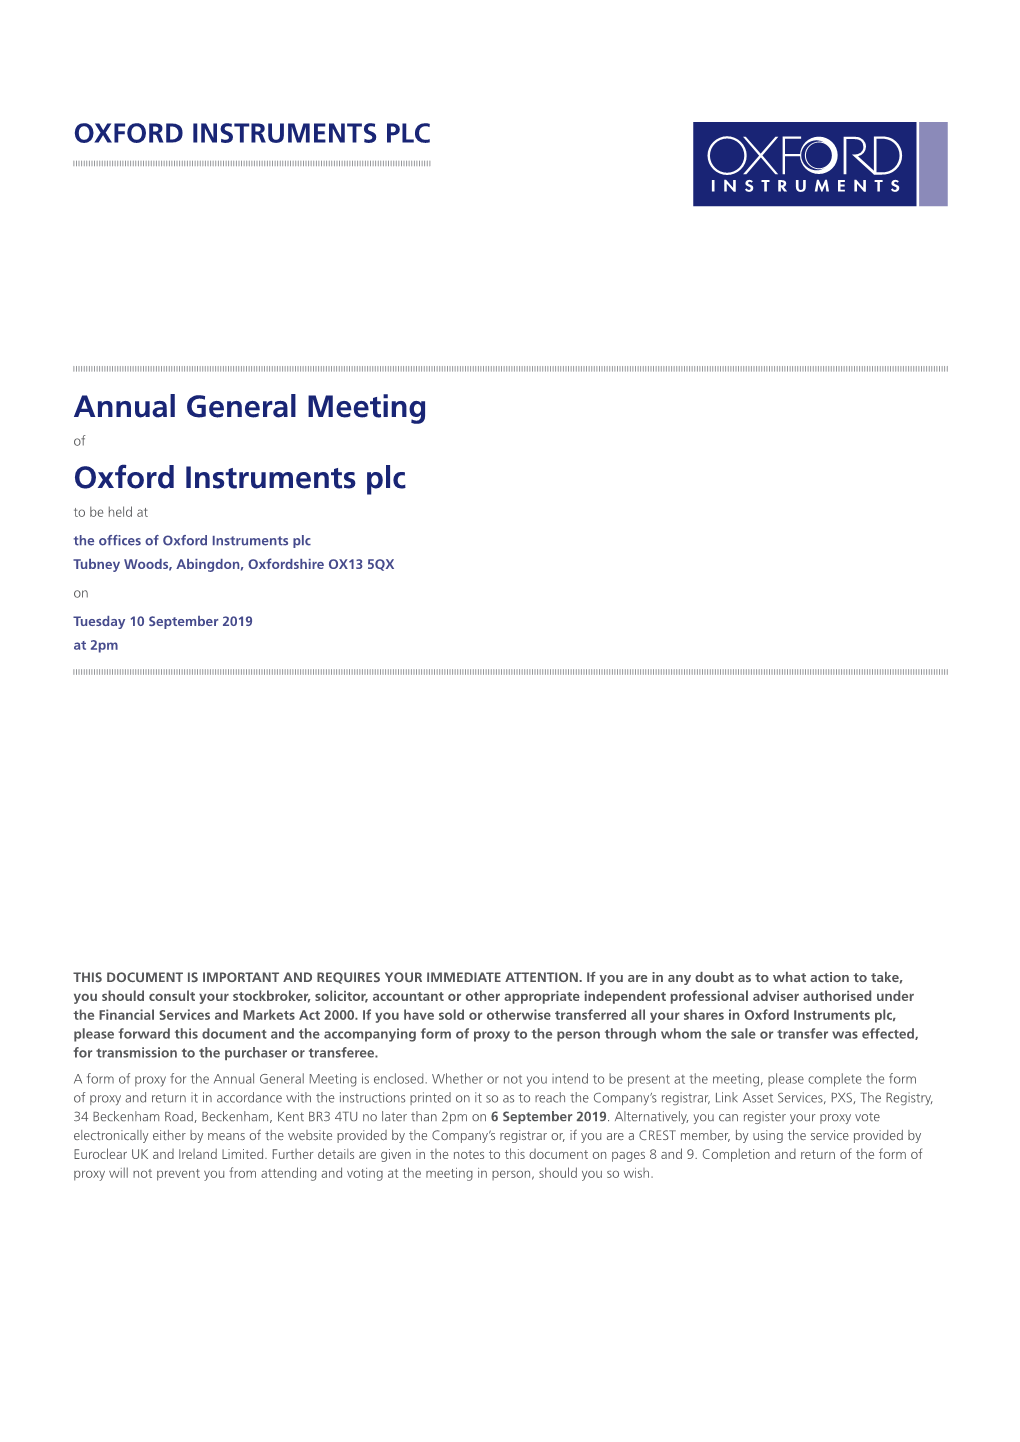 Annual General Meeting Oxford Instruments